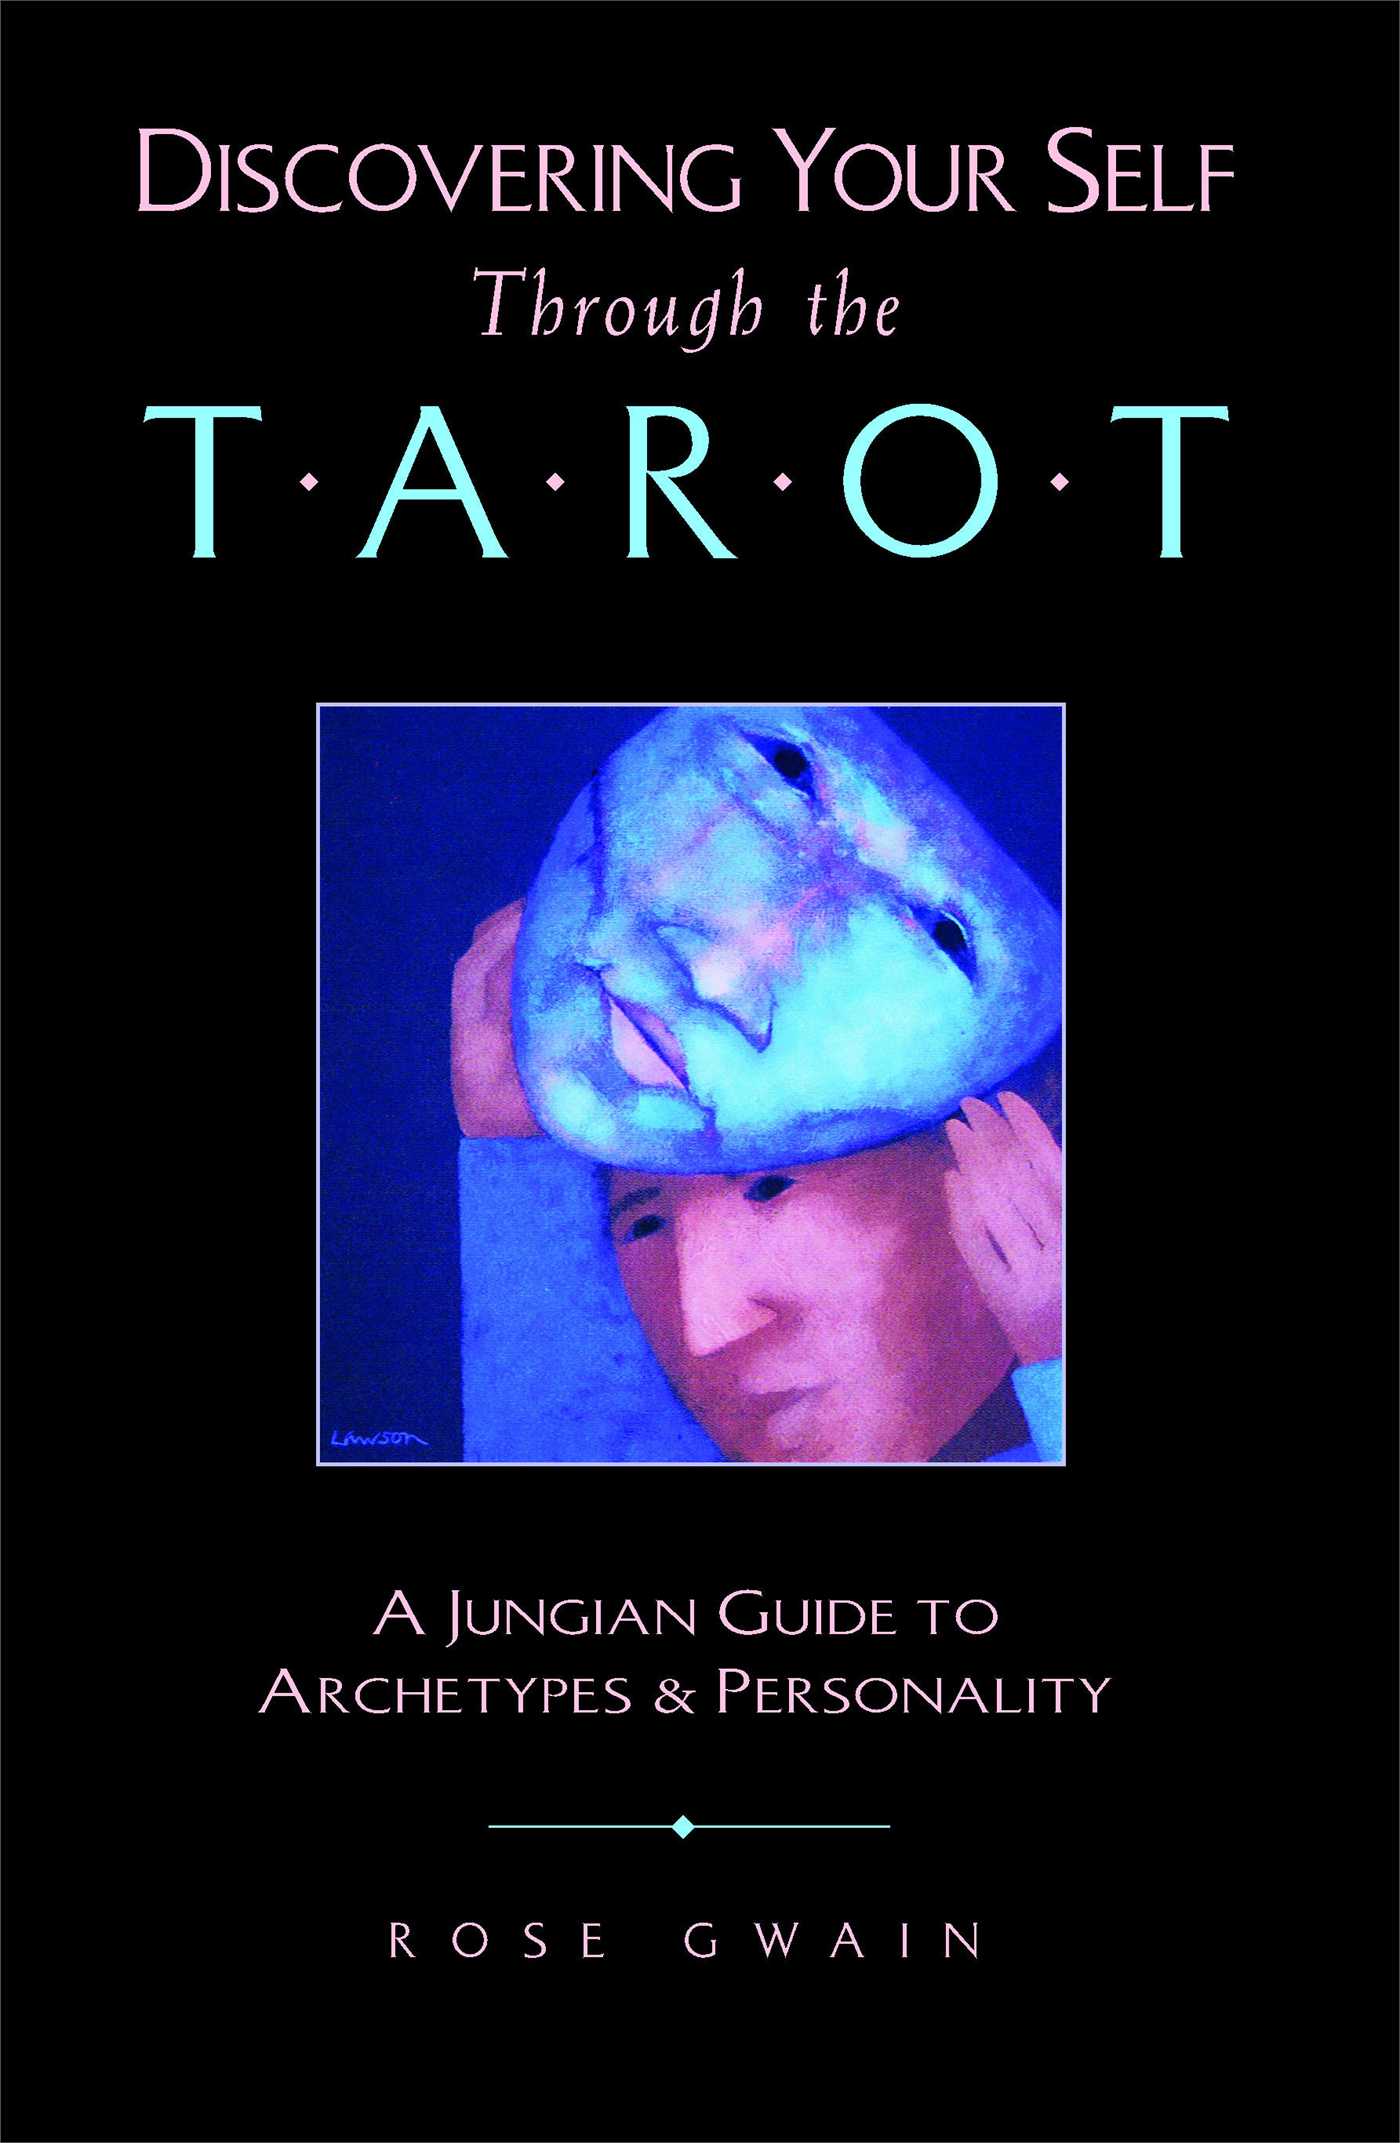 Discovering Your Self Through the Tarot by Rose Gwain